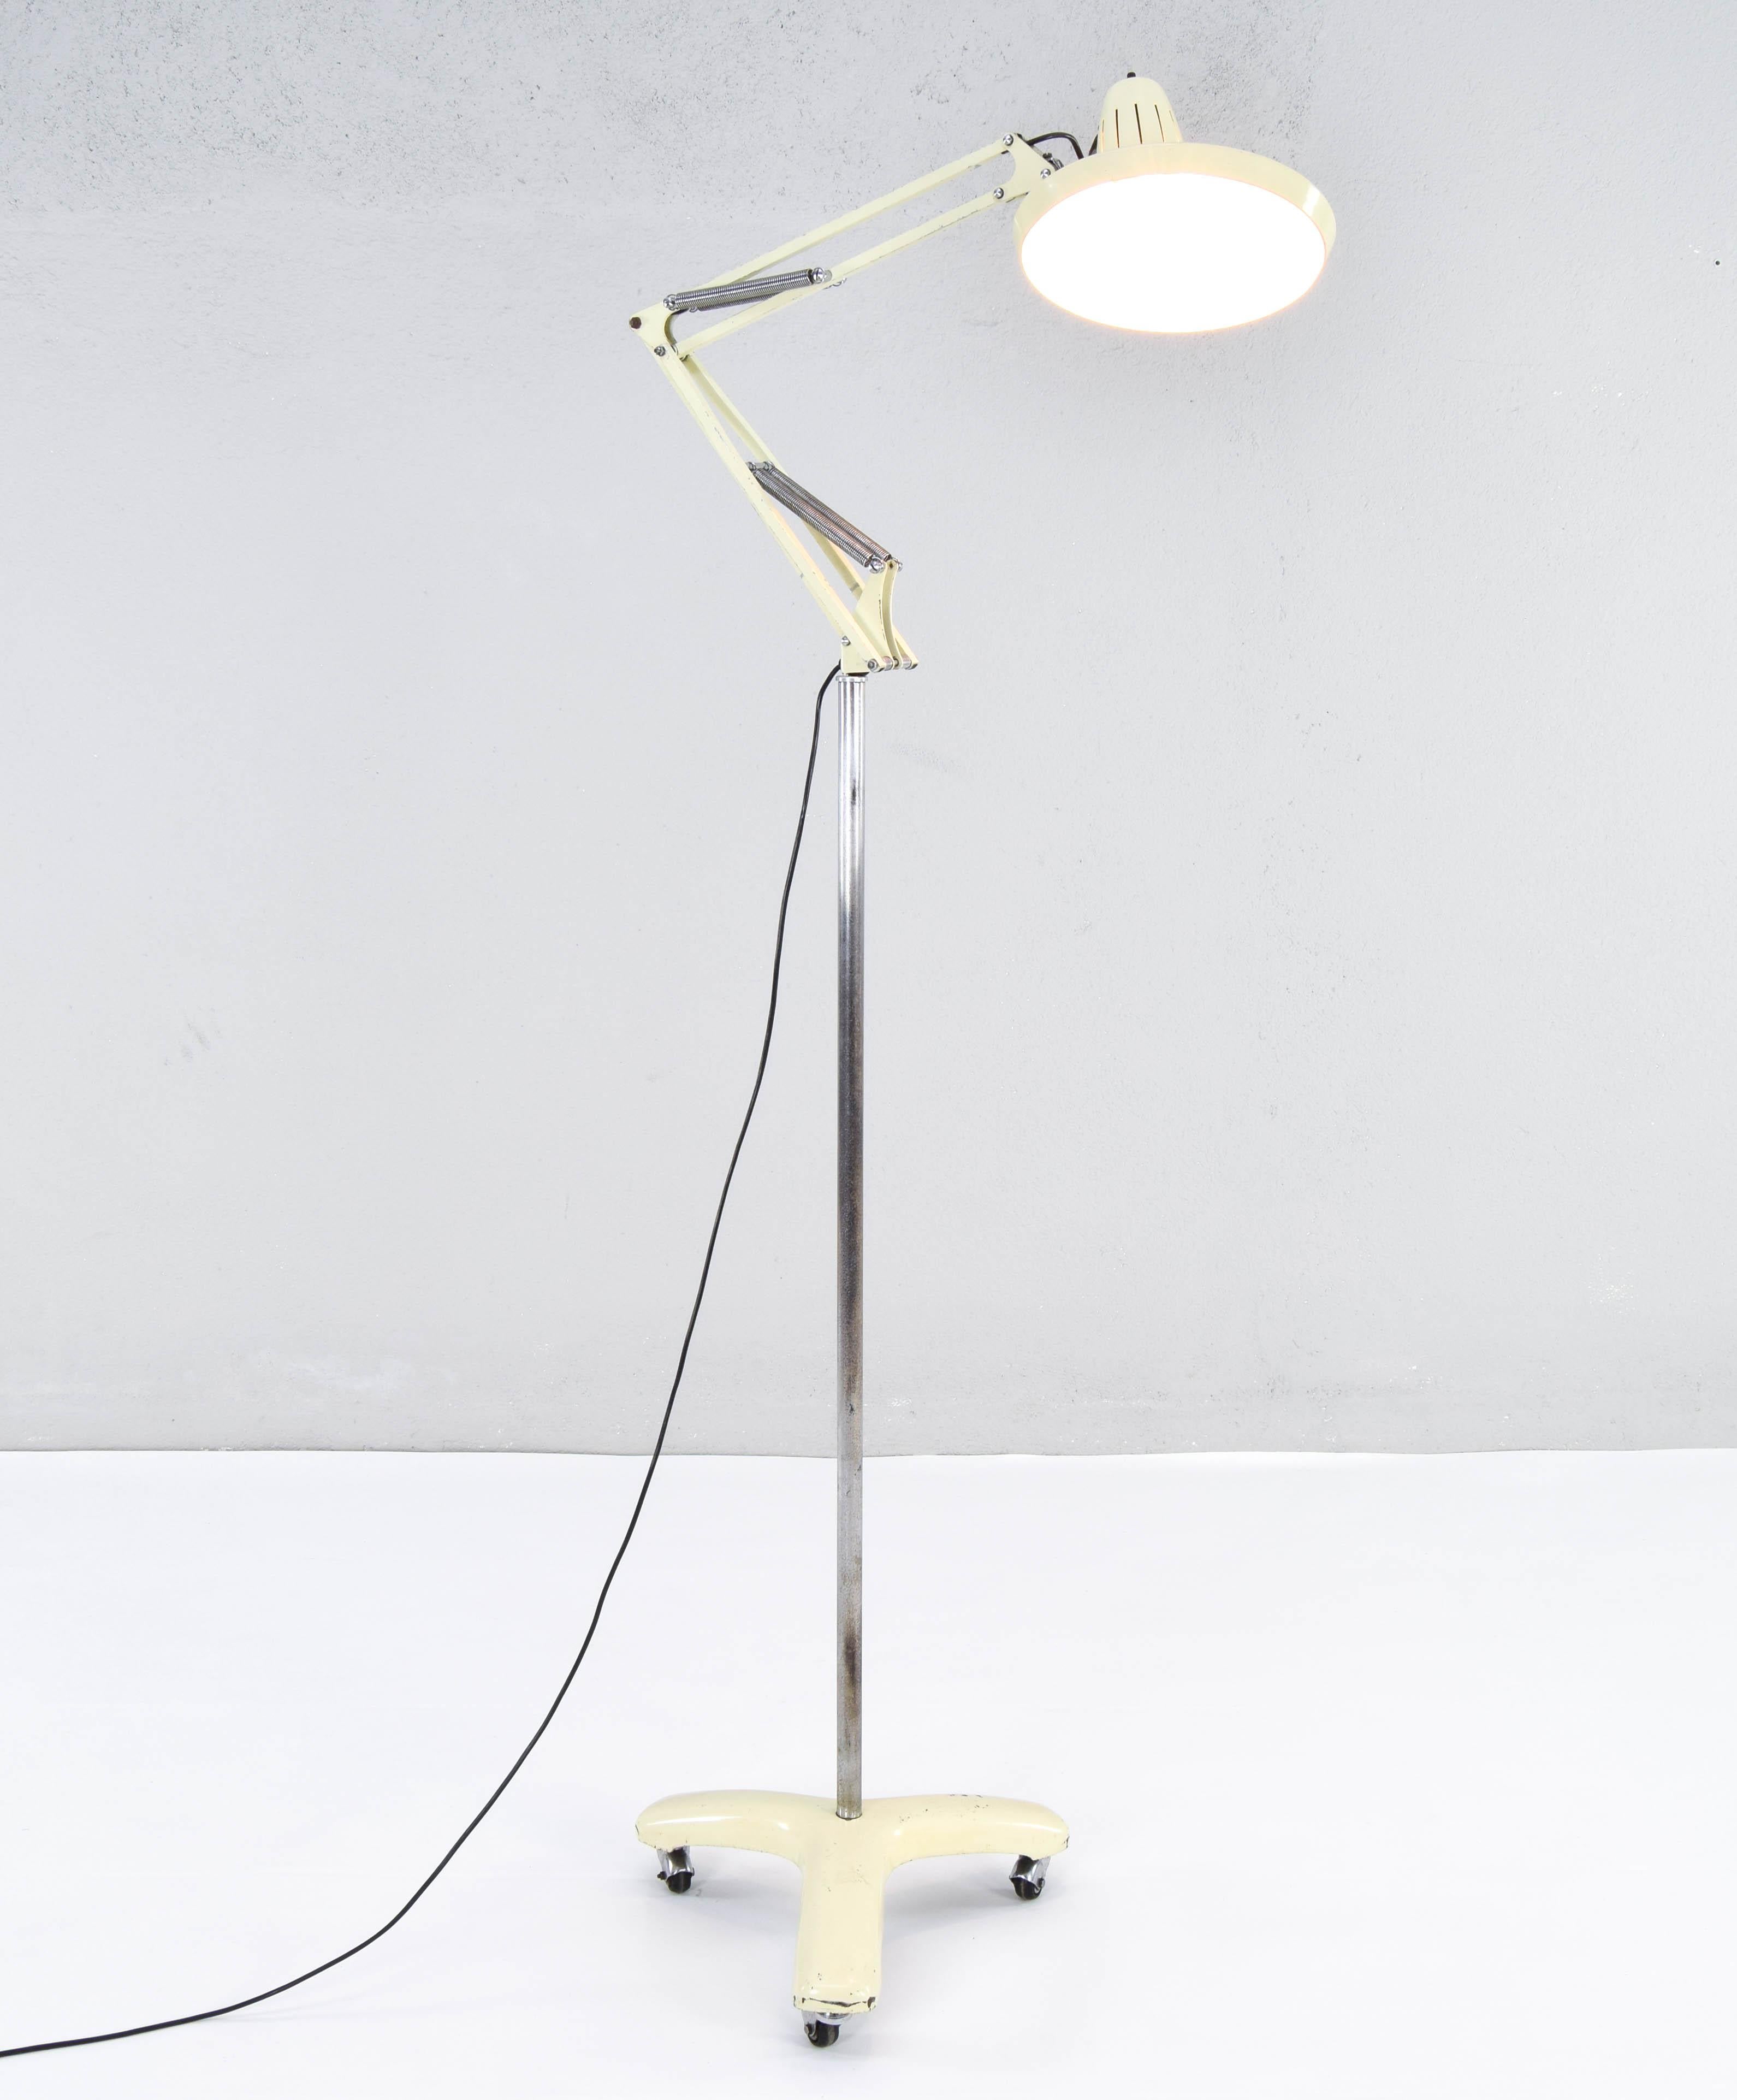 Lacquered Industrial Medical Lamp Faro Model of the Fase Brand, Spain, 1970